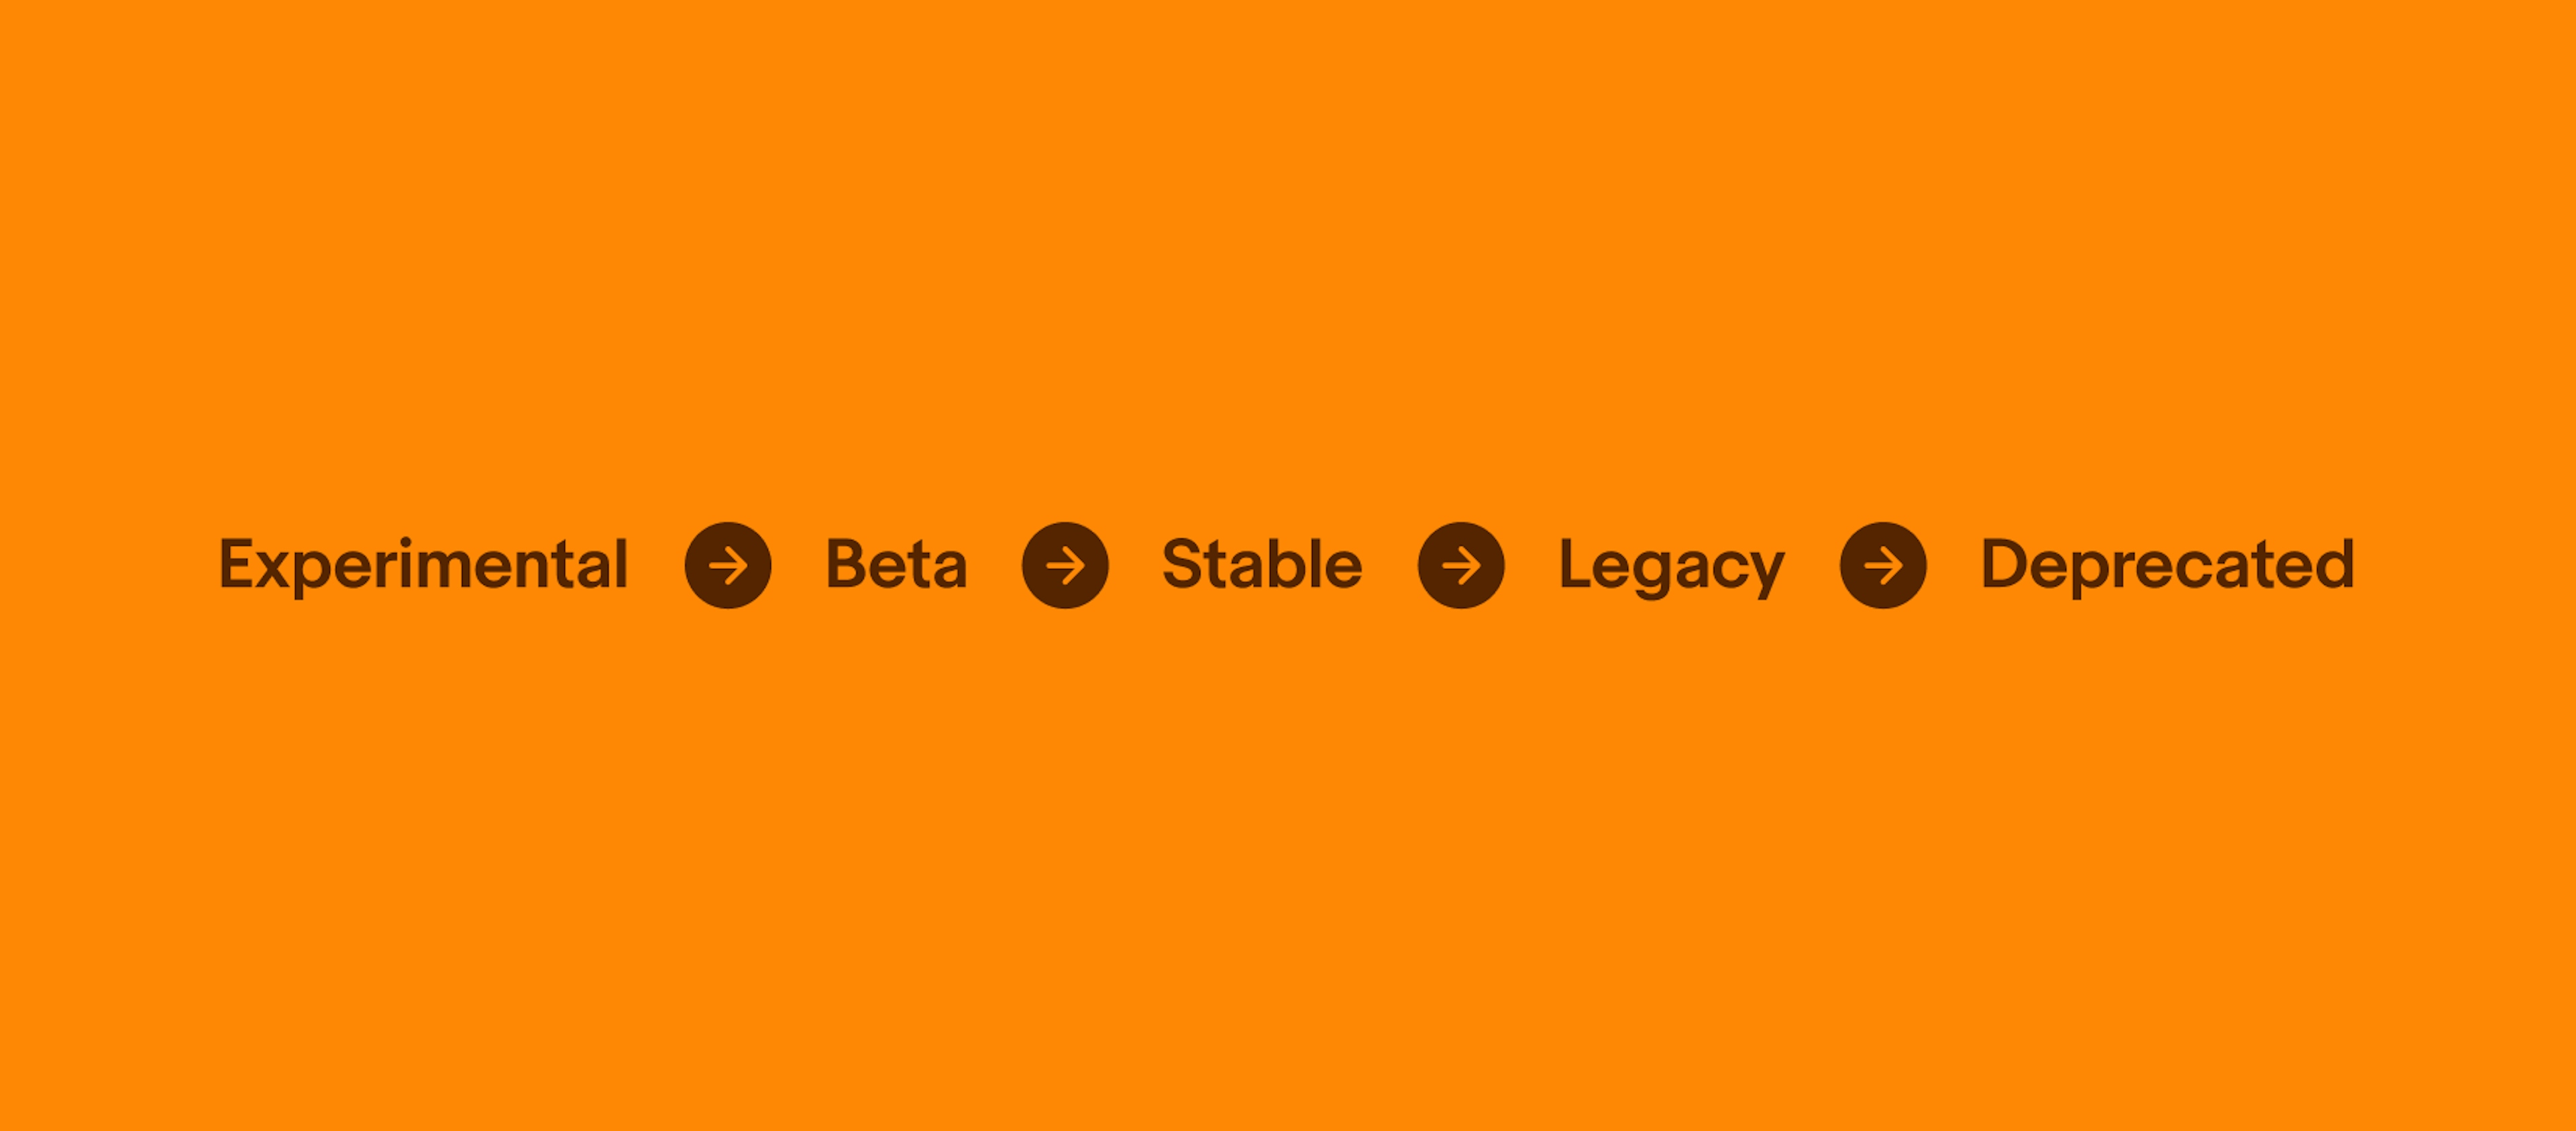 A lifecycle graphic with experimental > beta > stable > legacy > deprecated.